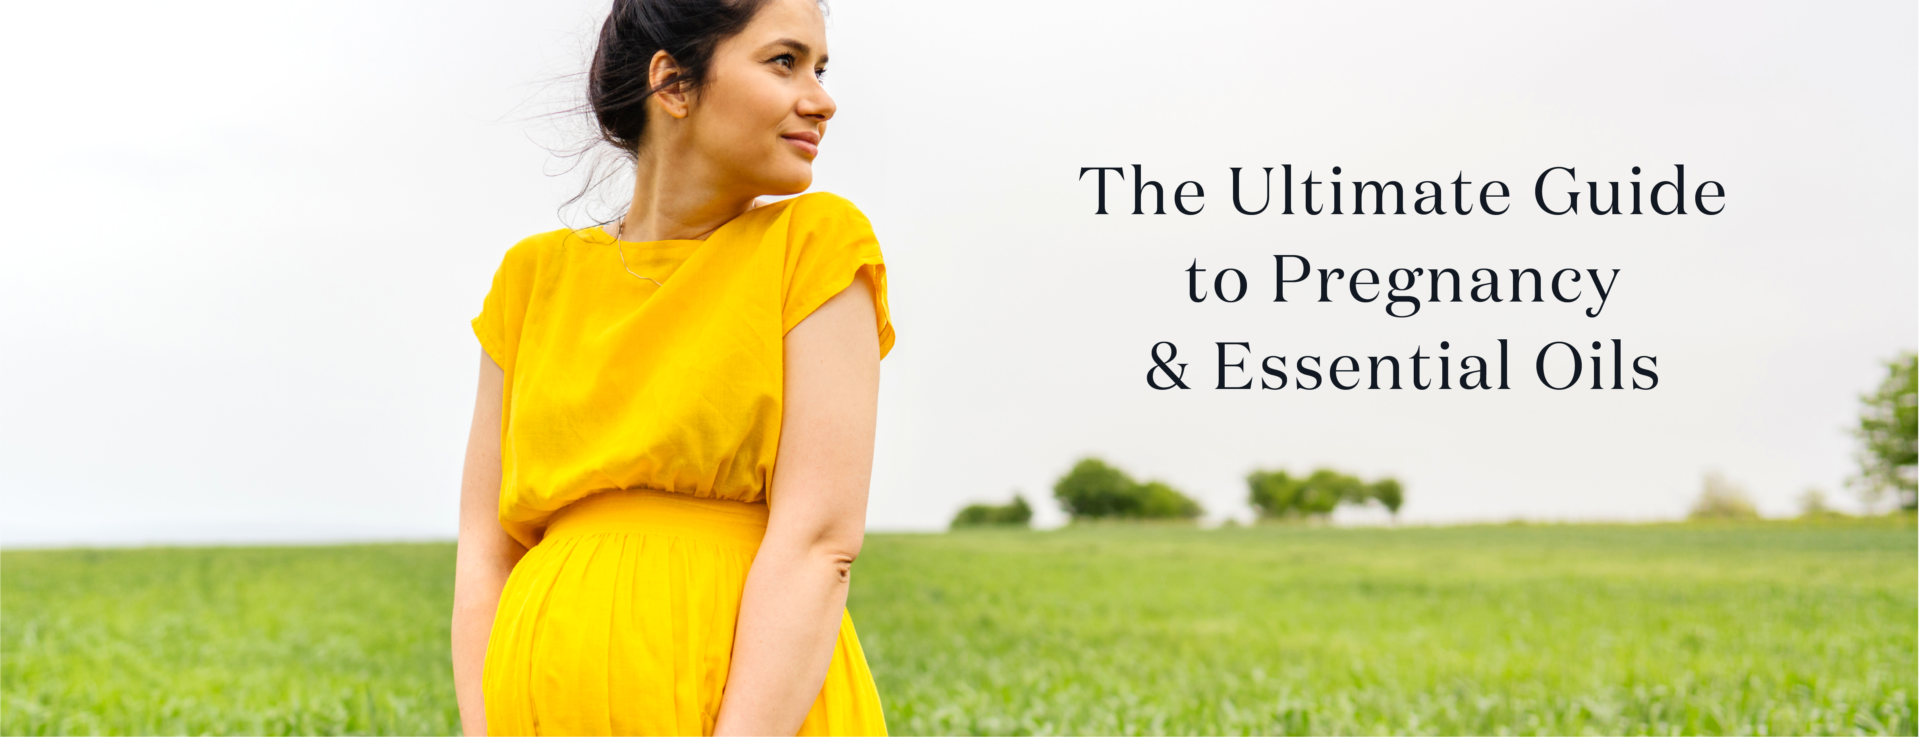 The Ultimate Guide To Pregnancy And Essential Oils Laptrinhx News